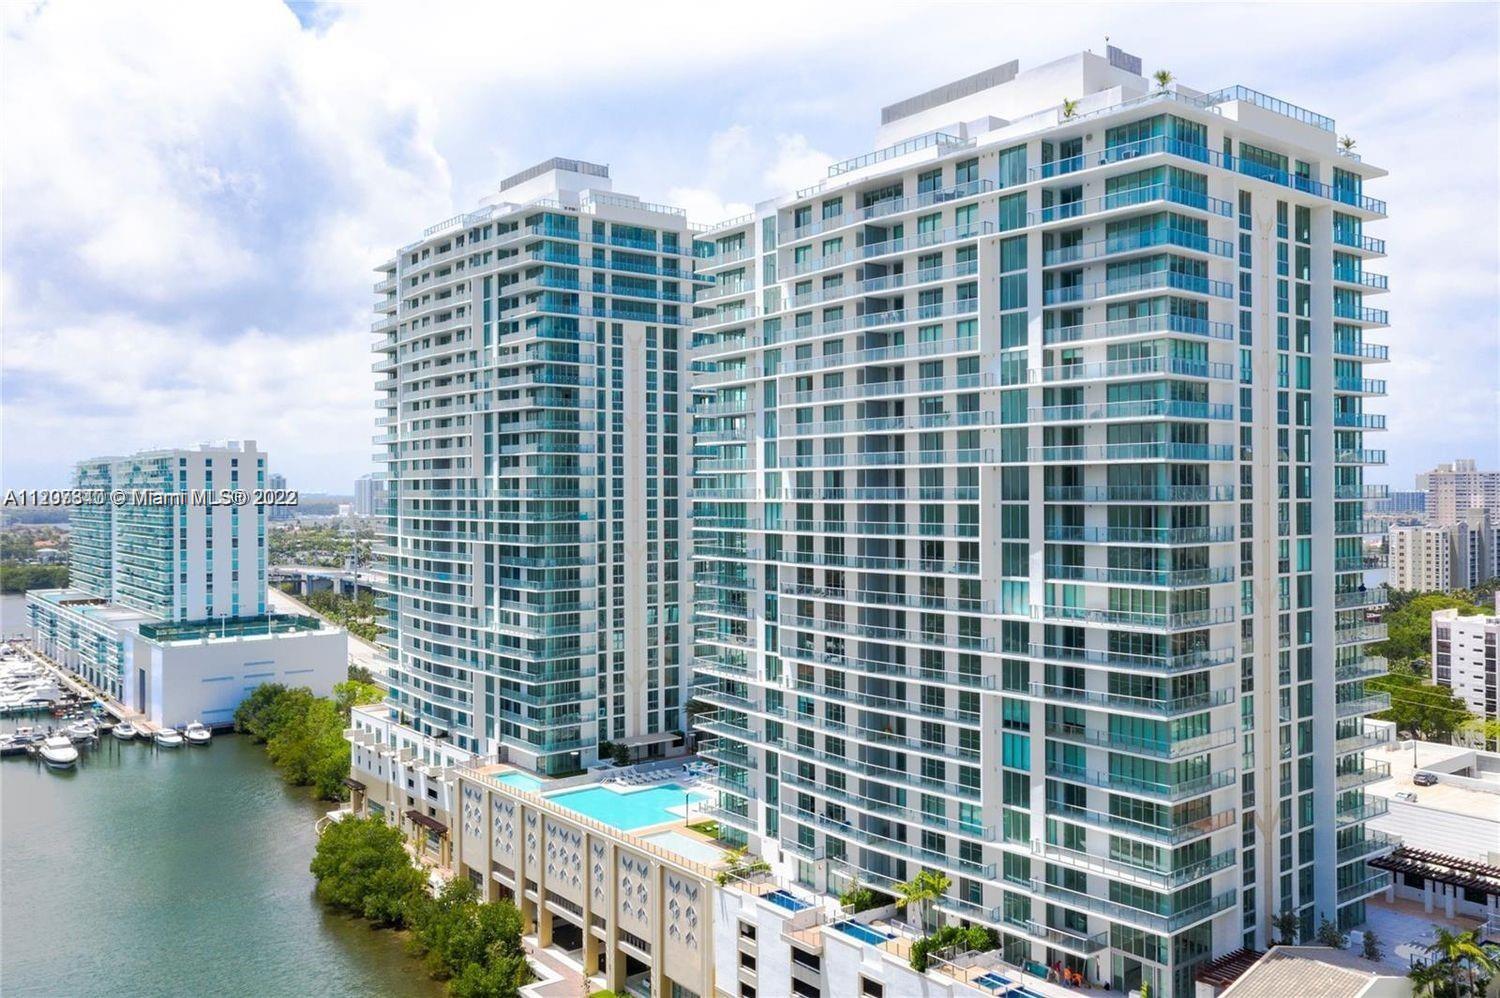 Magnificent corner unit overlooking Intercoastal water views. This fully upgraded residence features 3 spacious Bedrooms, 3.5 Bathrooms, and an oversized balcony. Parque Towers is located in the heart of Sunny Isles, only minutes walk to the beach and features 5-star luxury amenities including concierge 24-hour security , pool, children's playground, spa & fitness center, theatre room , wine bar, cigar lounge & media room. Guest suites are available for owner’s guests at special rates. The Most desirable line in the building.